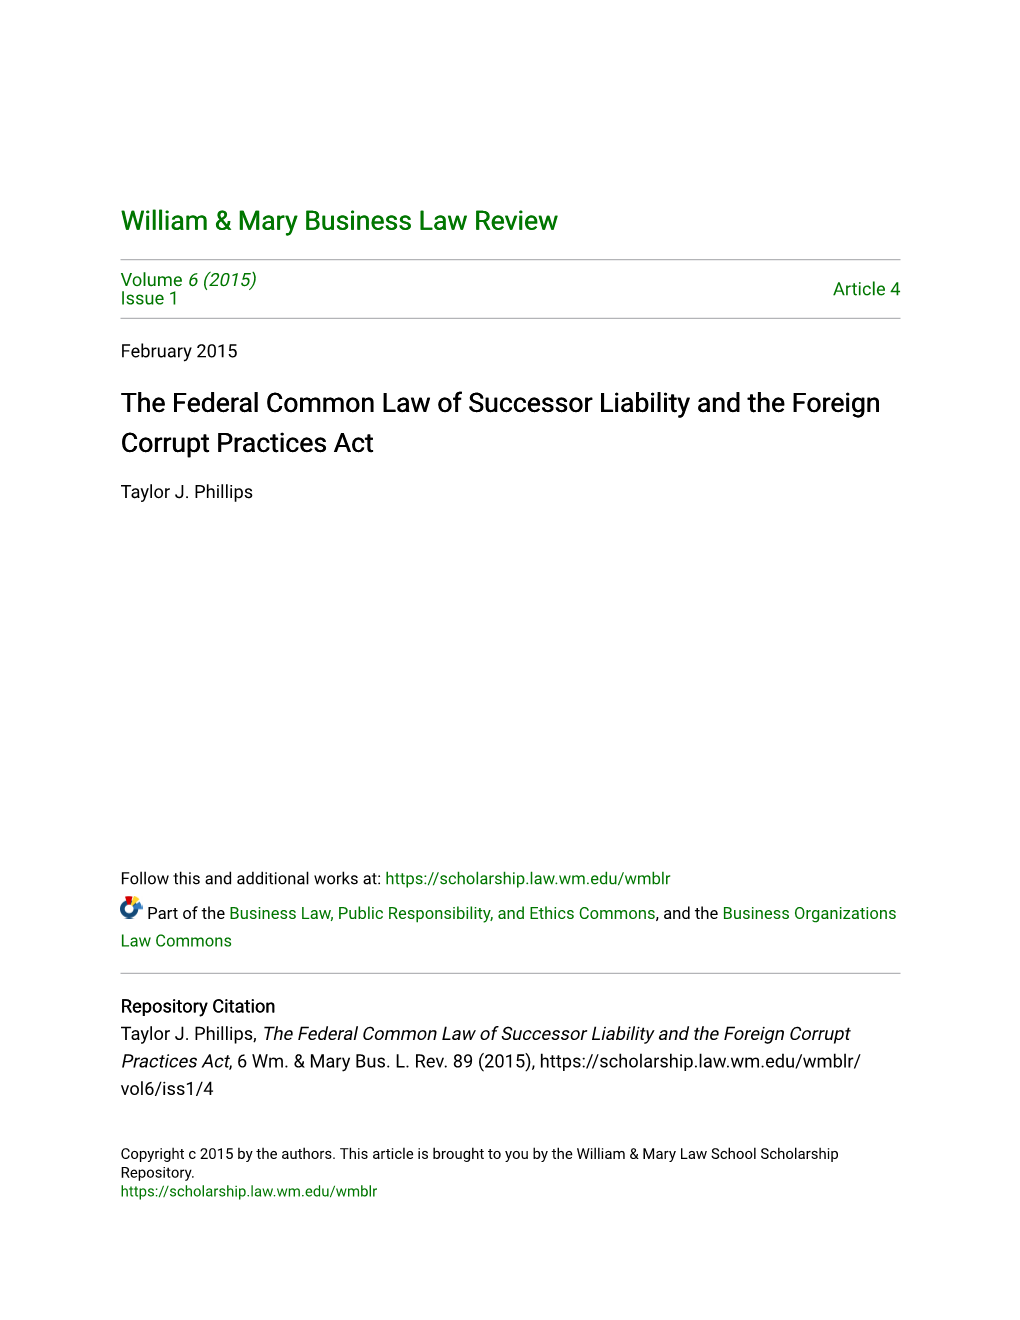 The Federal Common Law of Successor Liability and the Foreign Corrupt Practices Act